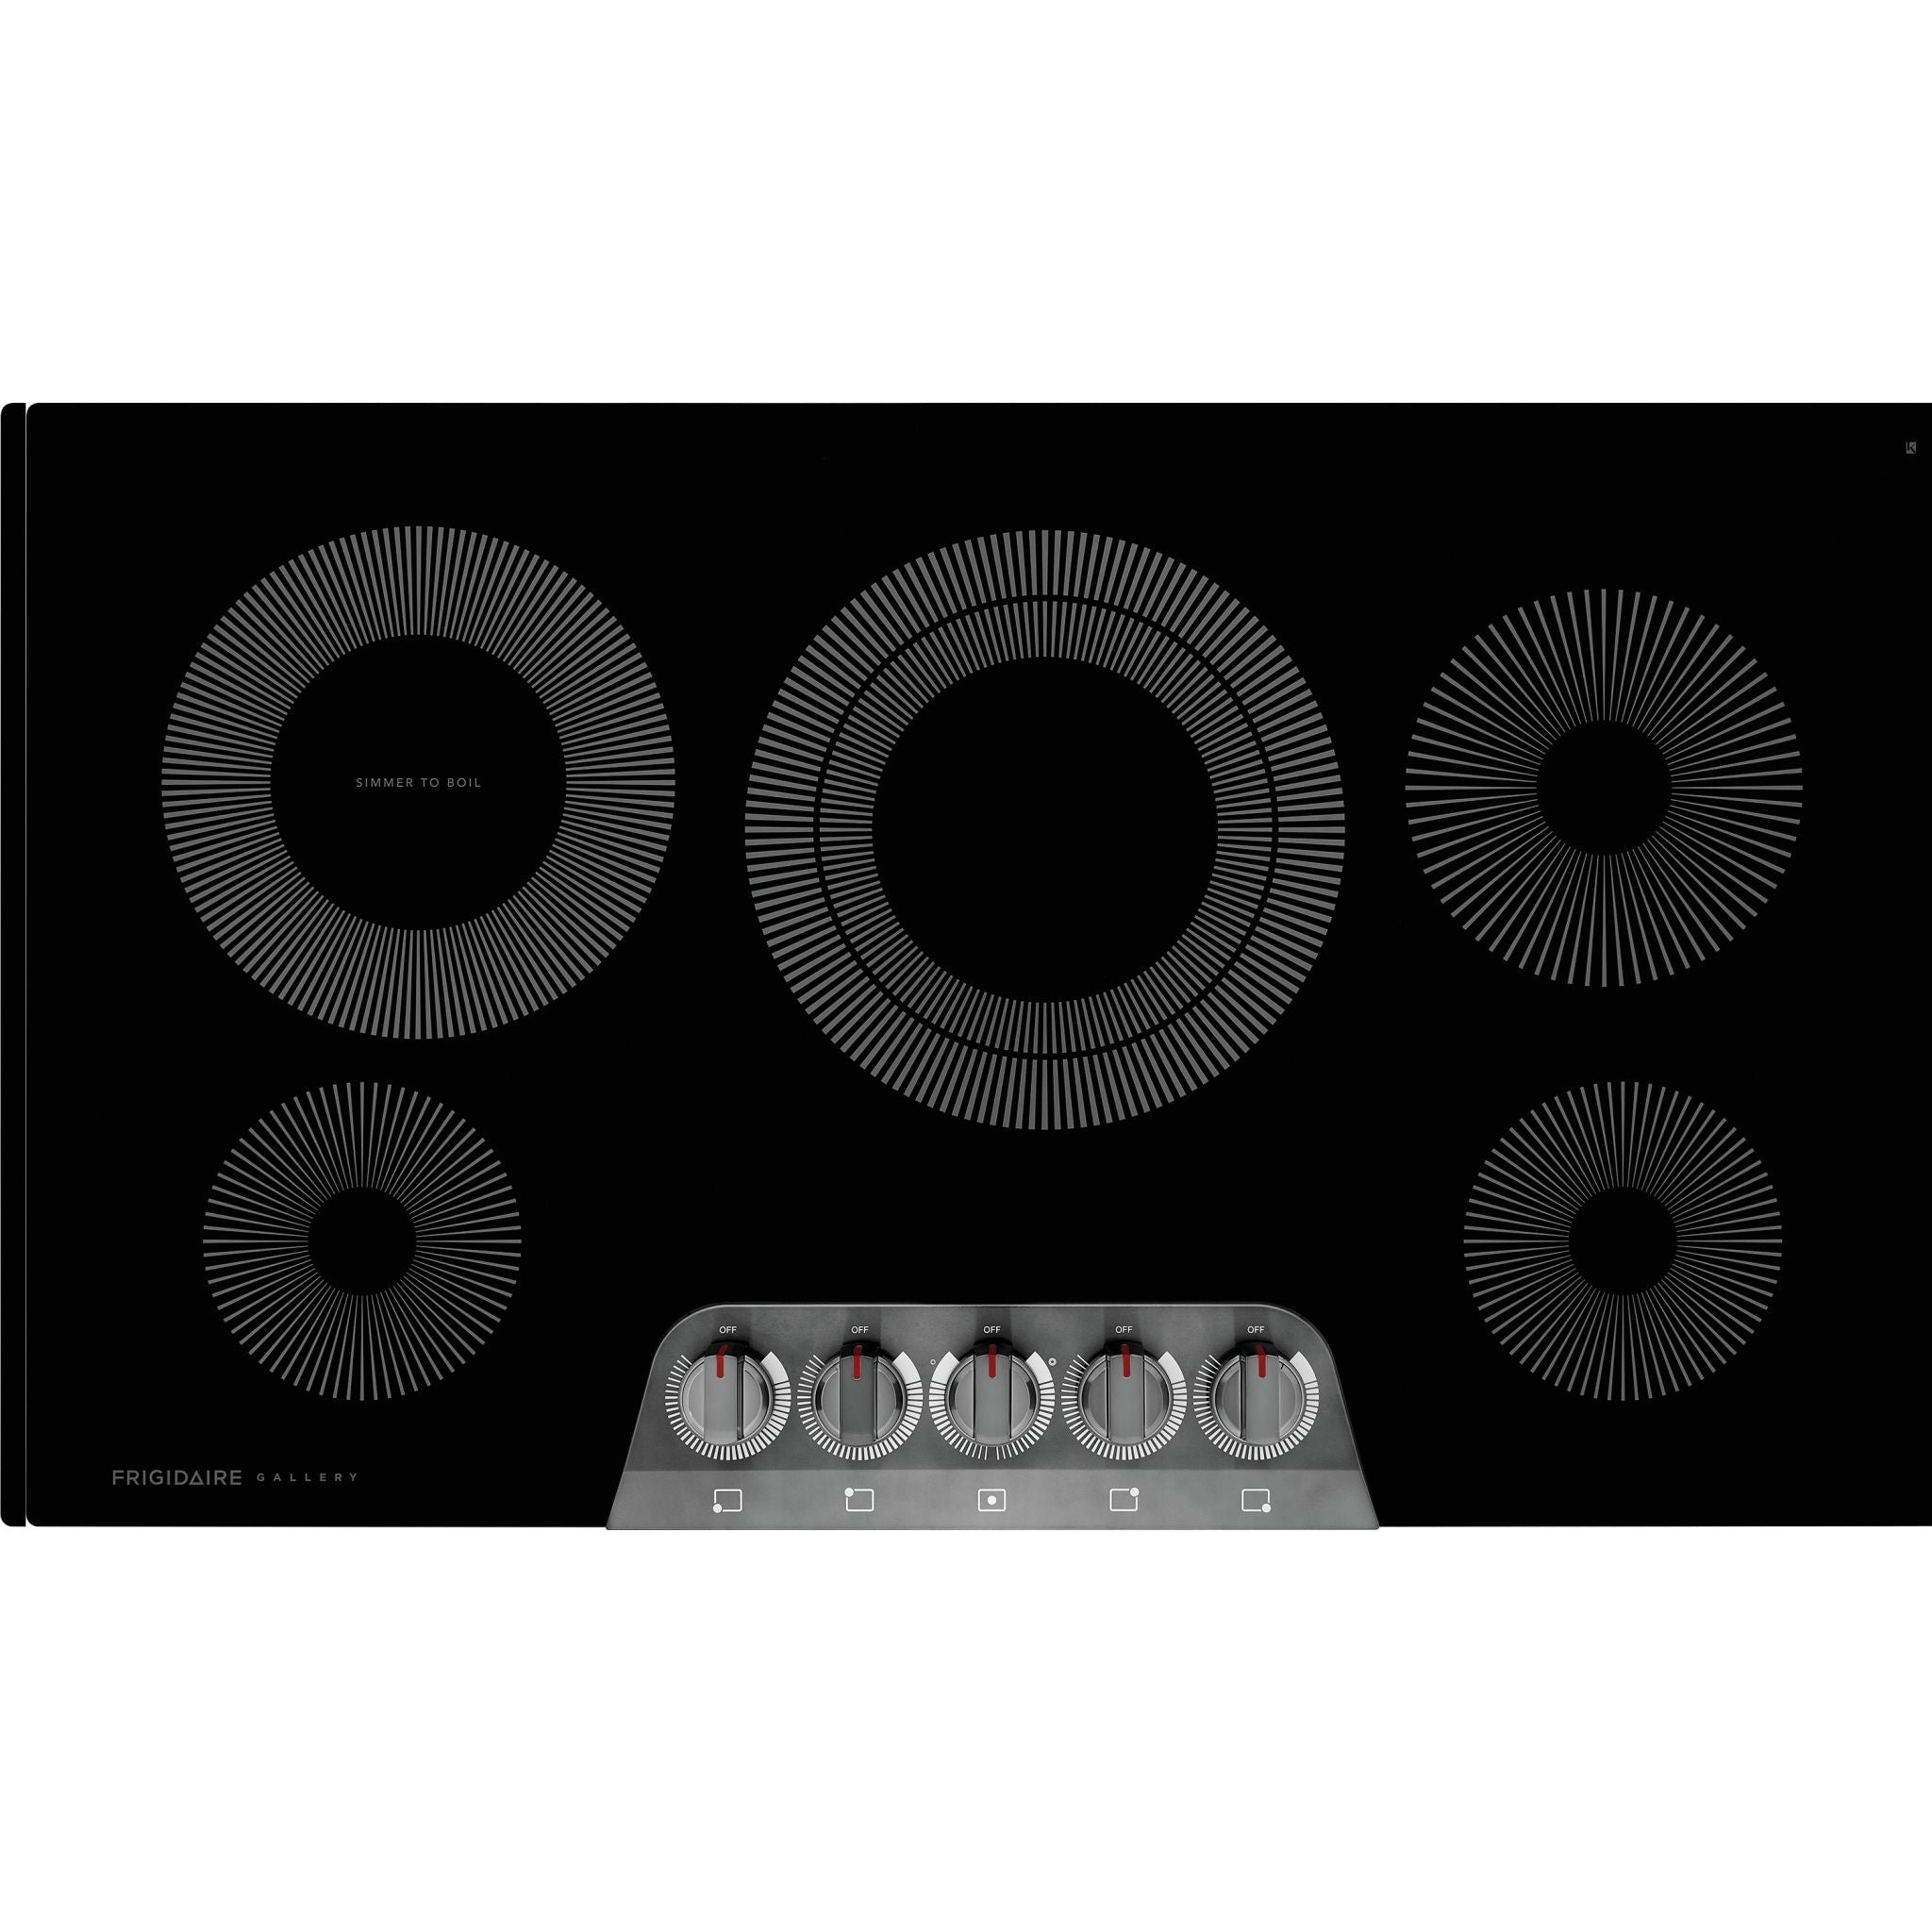 Frigidaire Gallery, Frigidaire Gallery 36" Cooktop (GCCE3670AS) - Stainless Steel